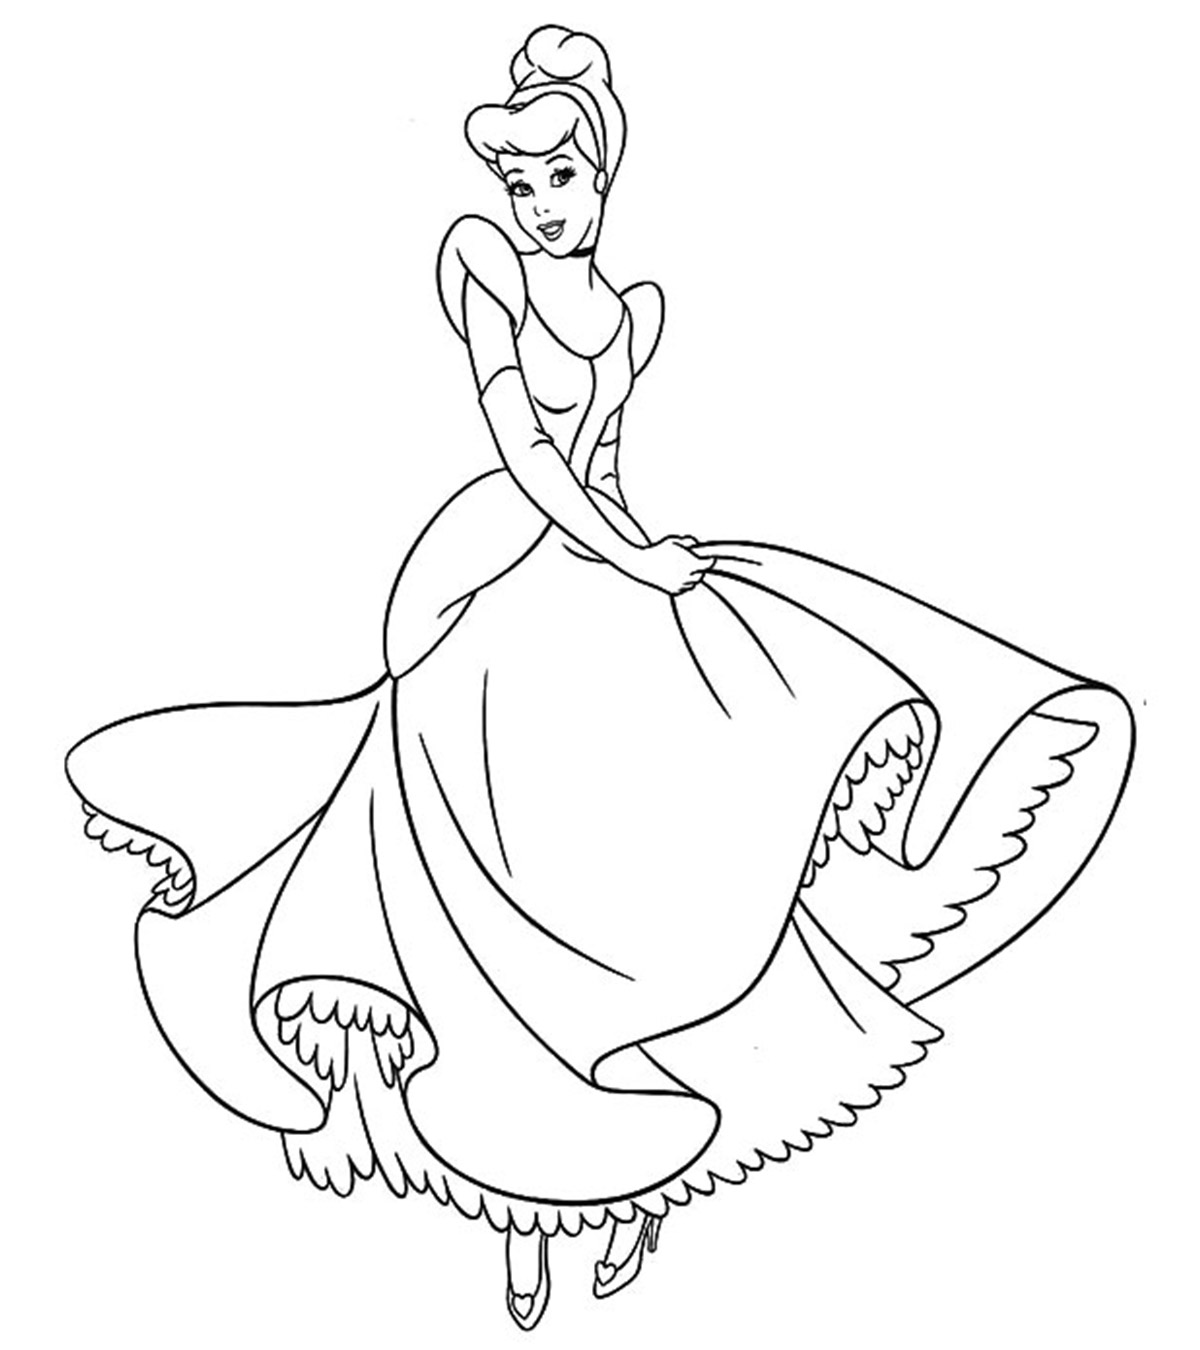 People Coloring Pages - MomJunction